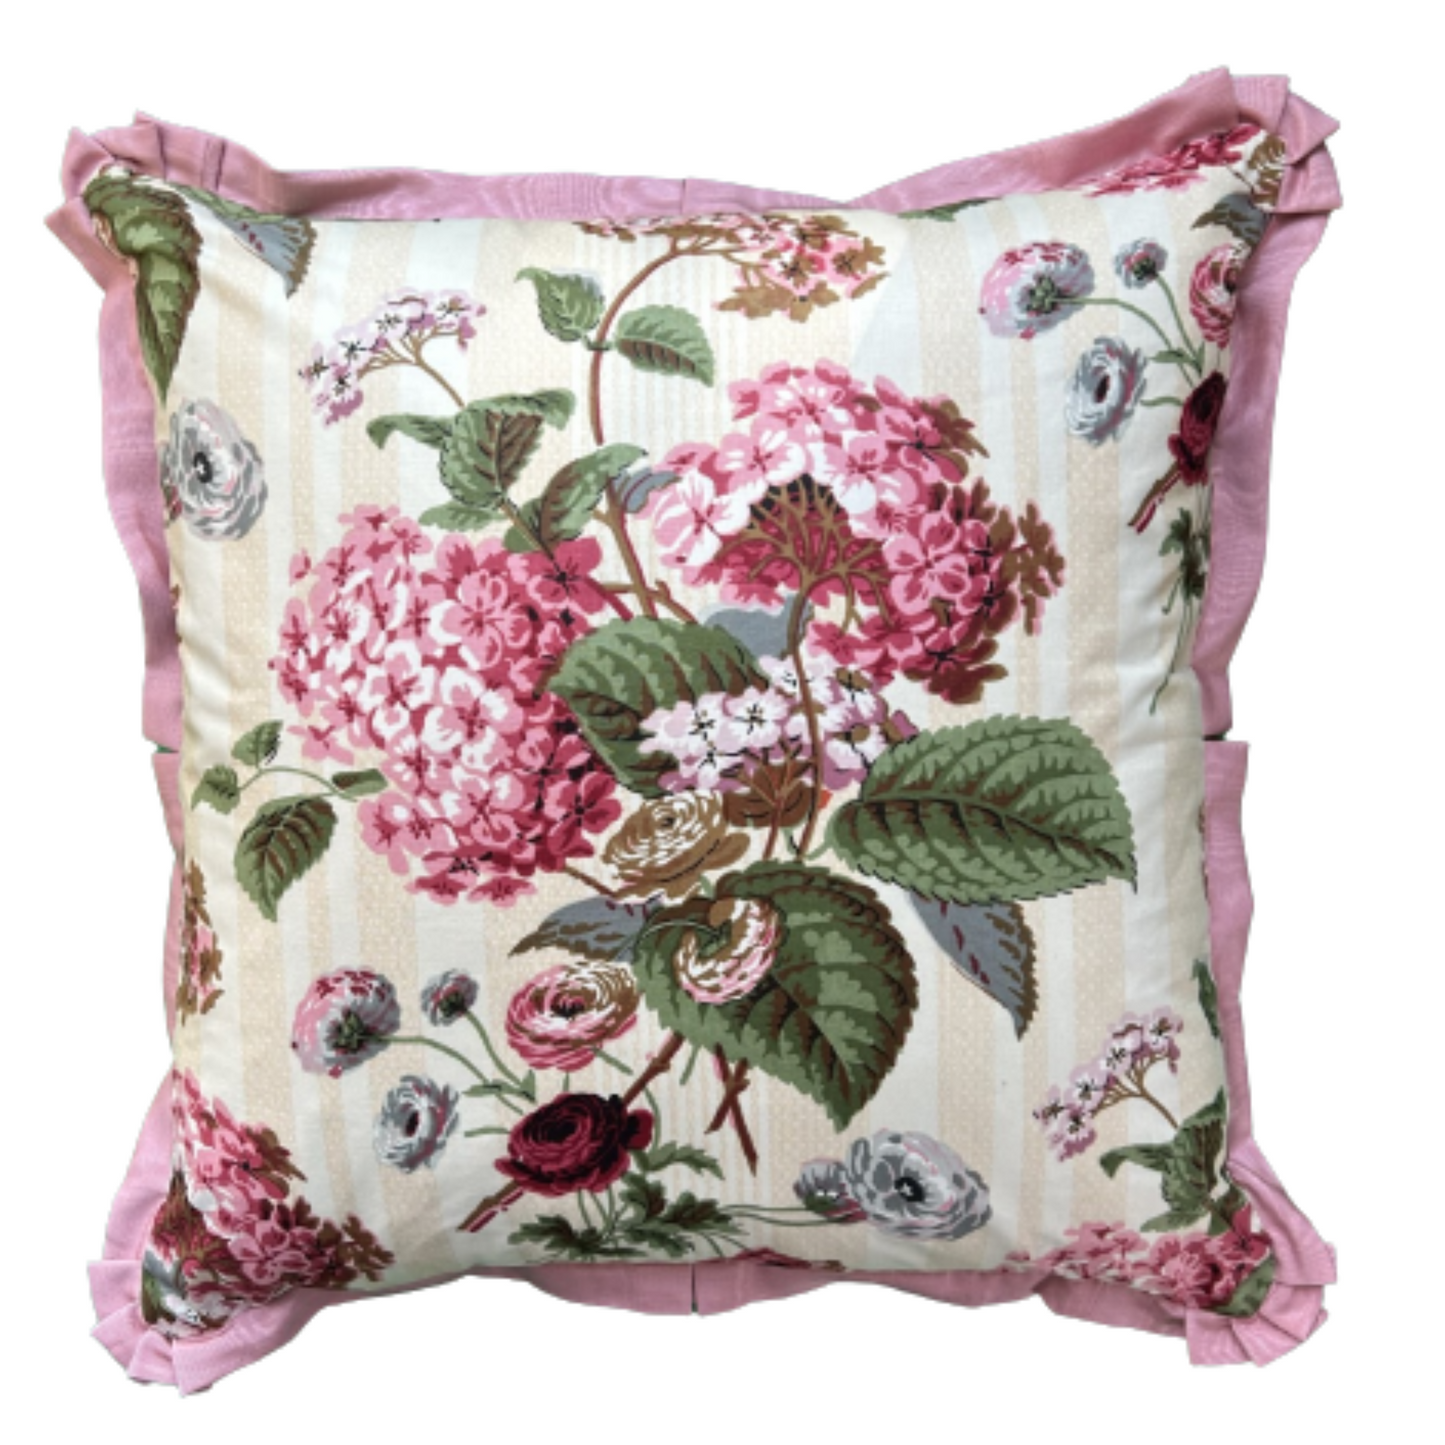 Colefax Pink Hydrangea 20 x 20 Square Decorative Pillow with Down Feather Insert